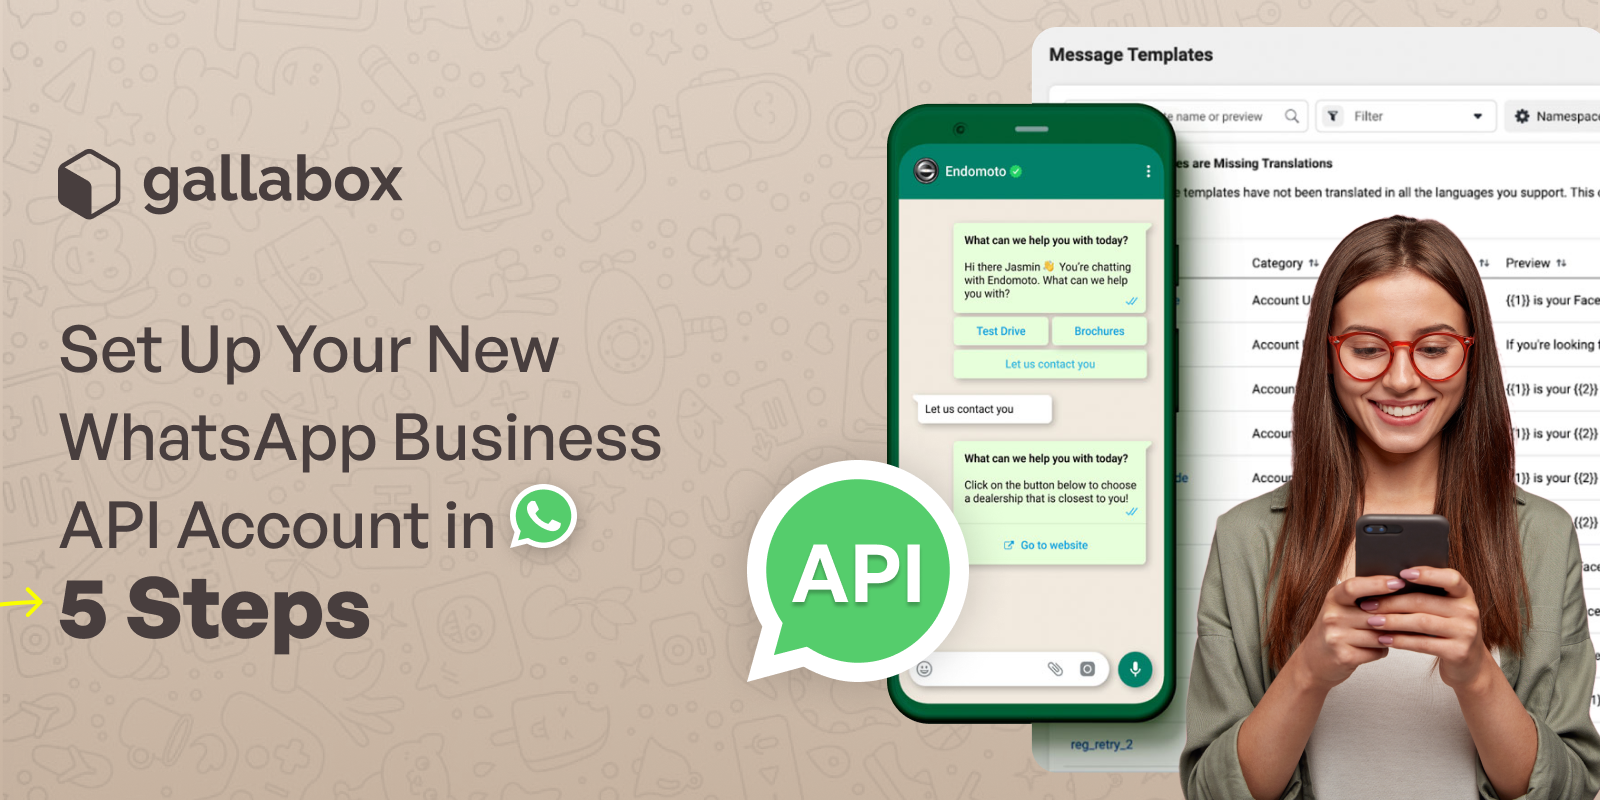 Set Up Your New WhatsApp Business API Account in 5 Steps